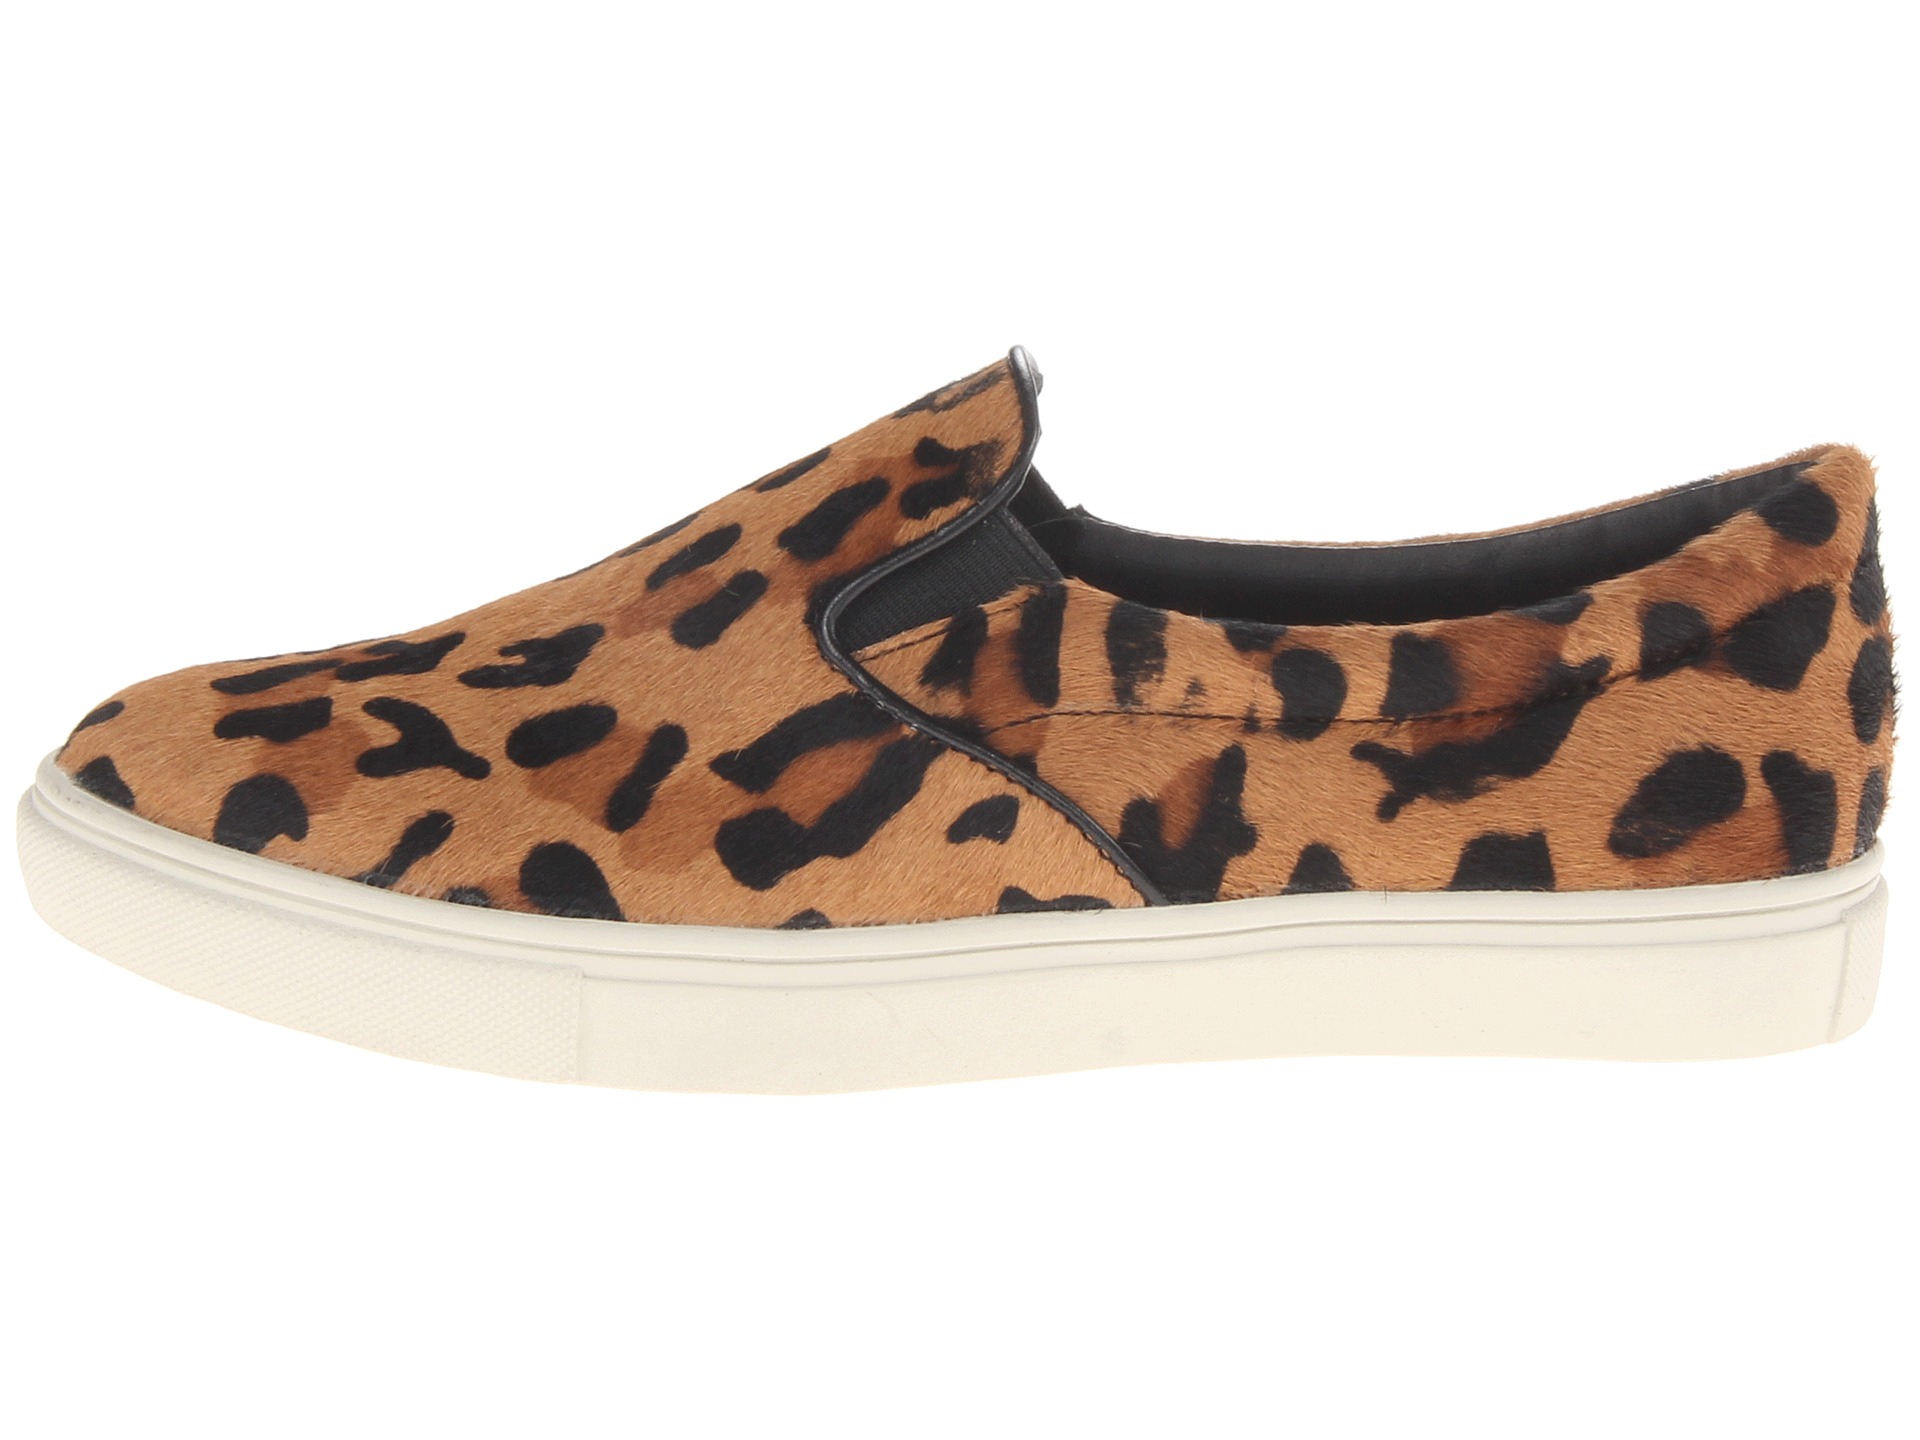 Steve Madden Ecentric Leopard | Shipped Free at Zappos